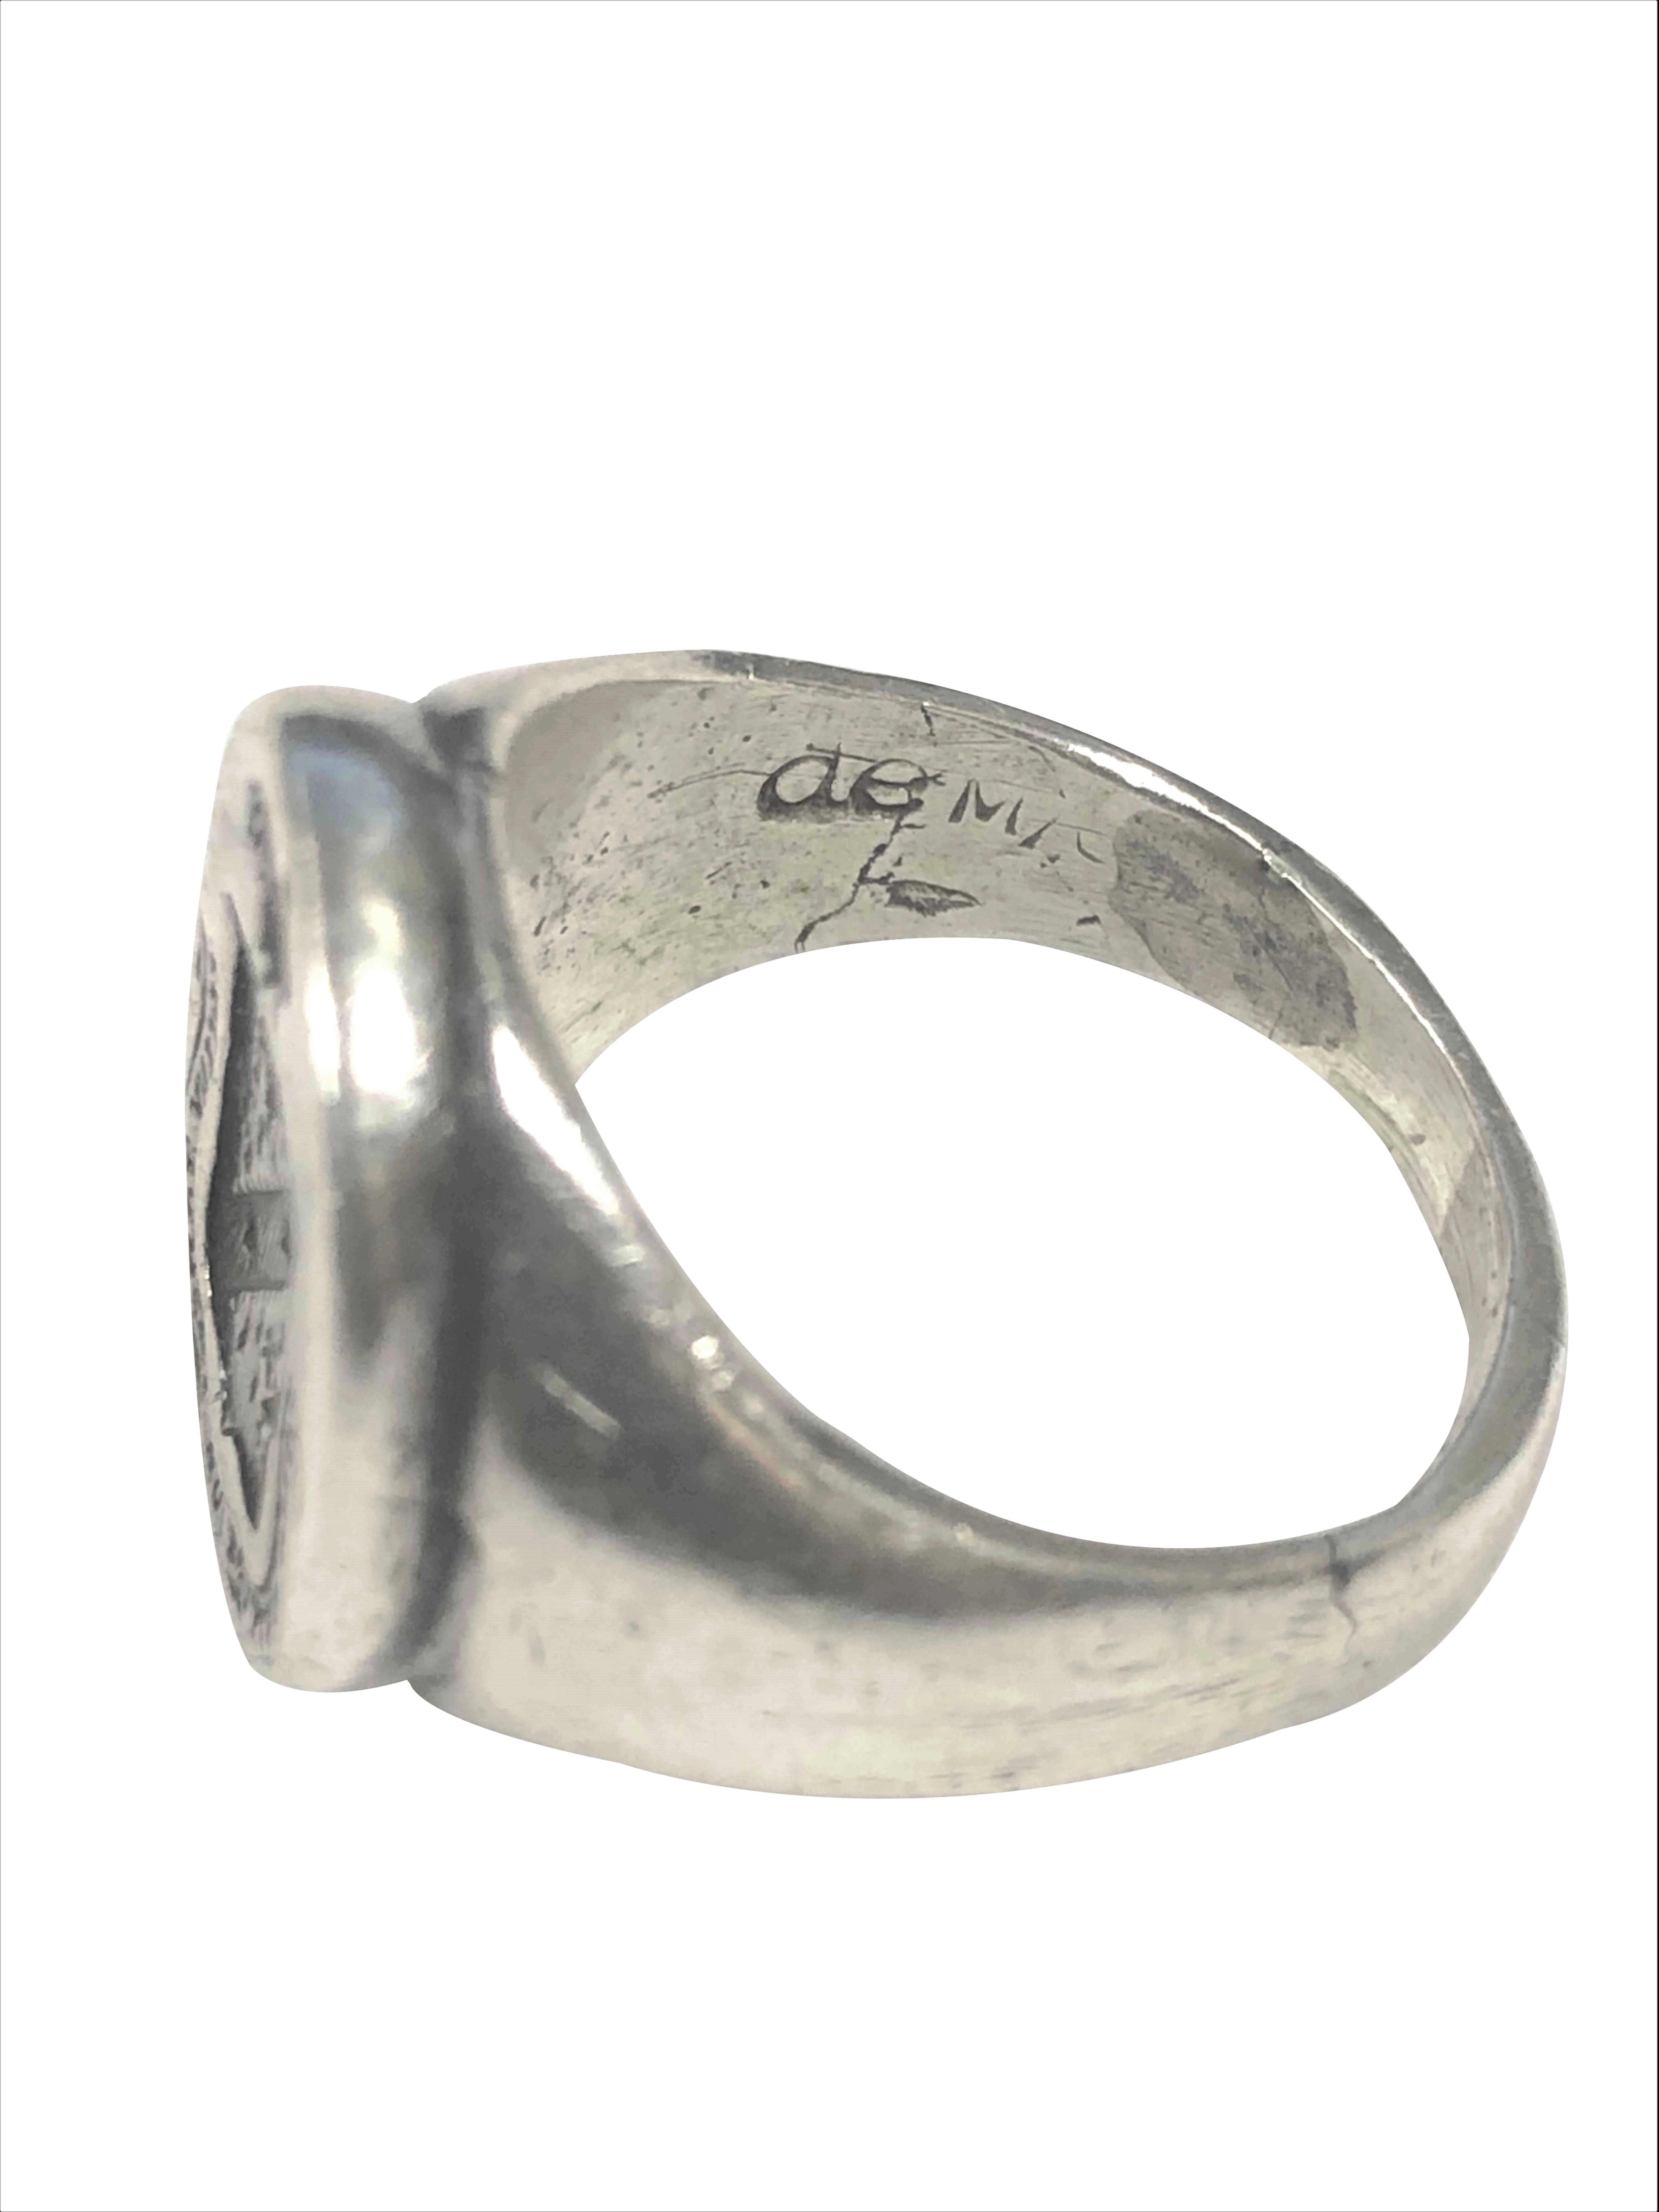 antique silver signet ring